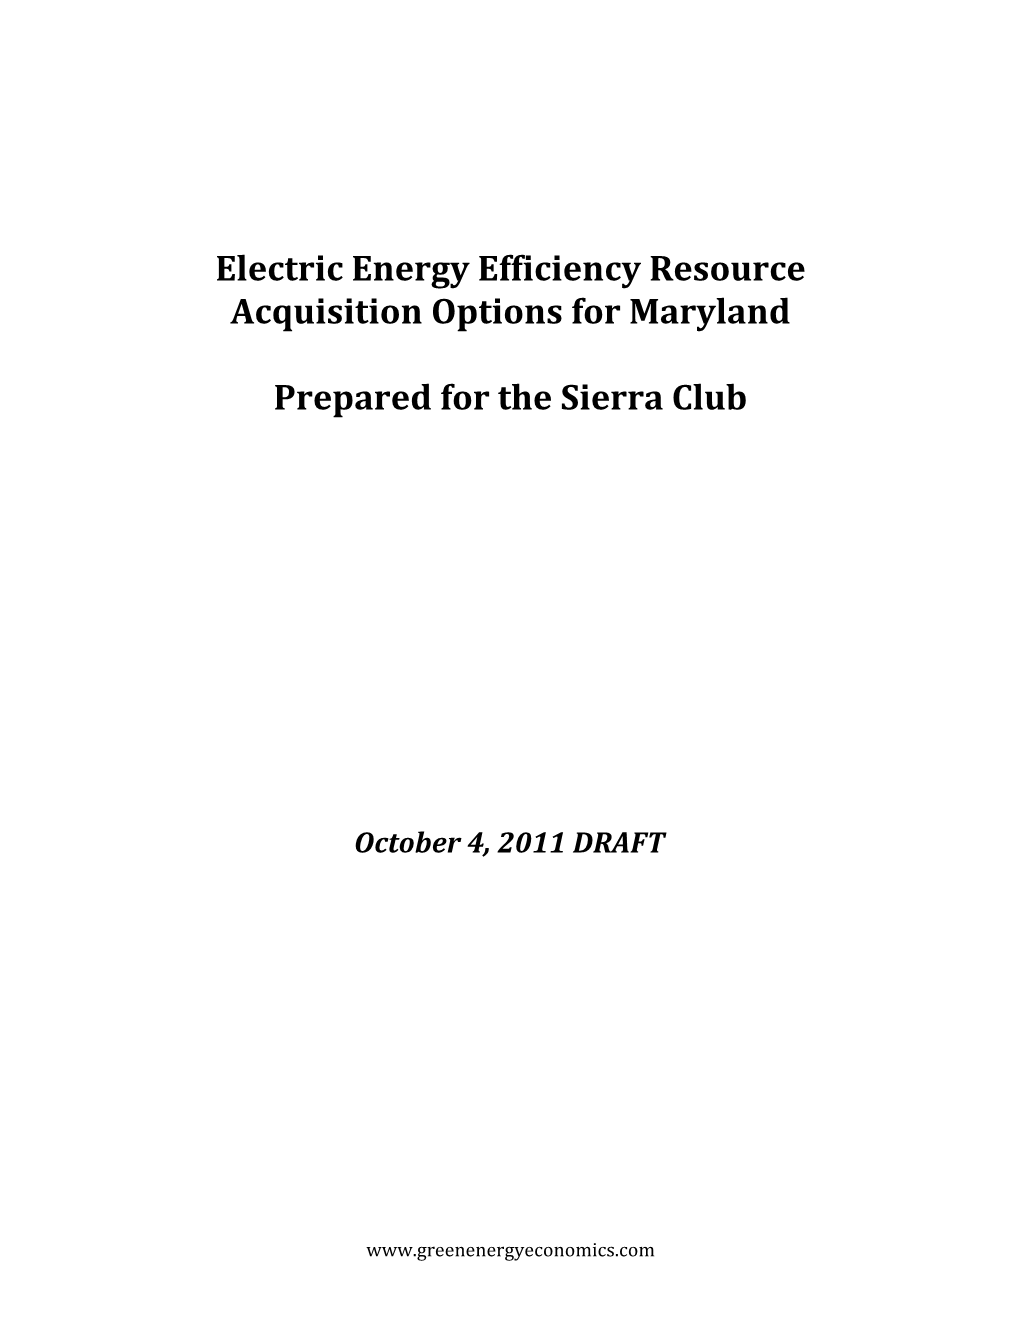 Electric Energy Efficiency Resource Acquisition Optionsformaryland